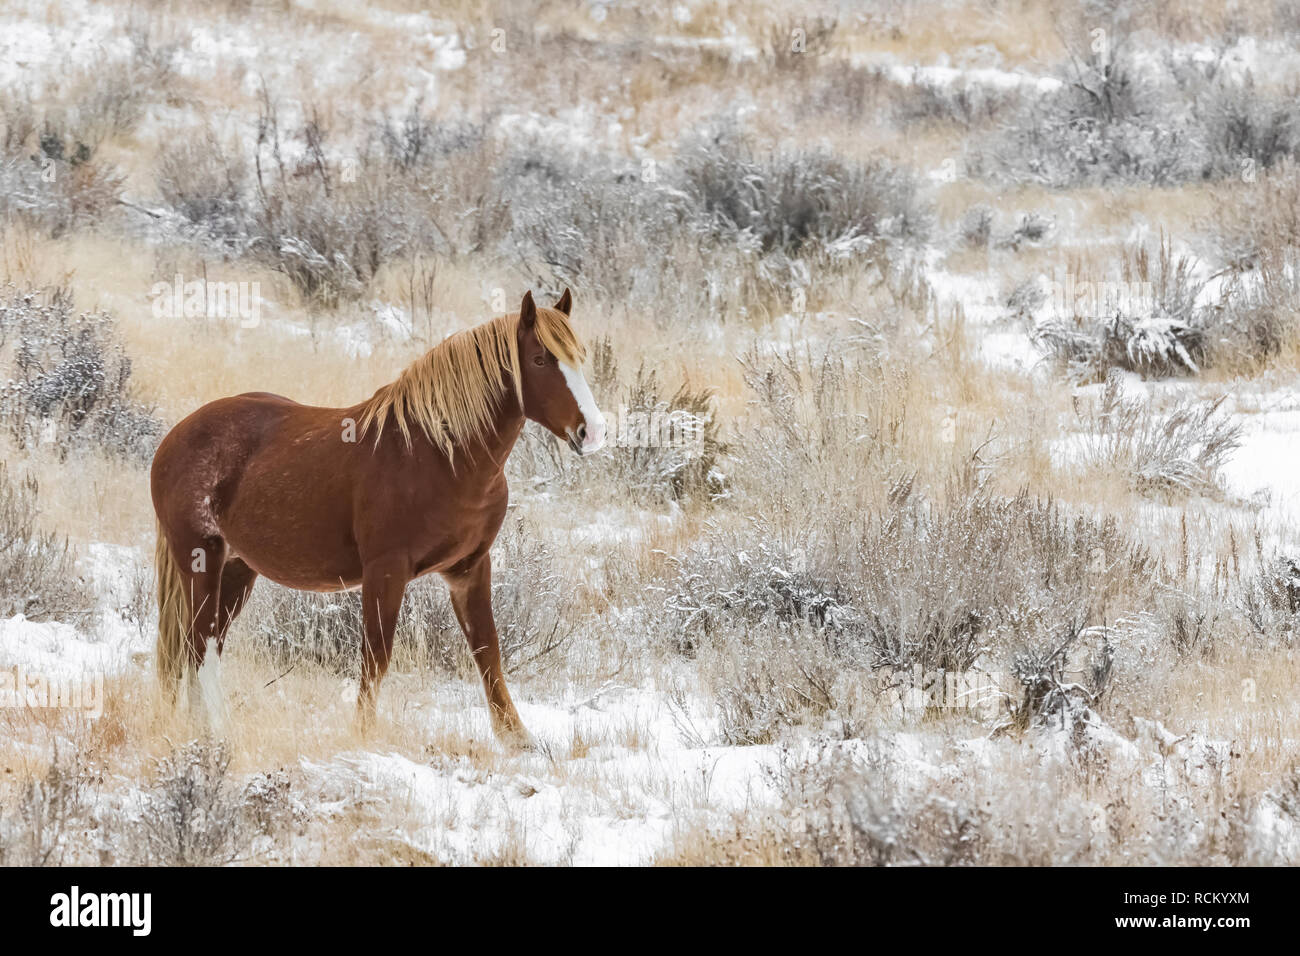 Wild Horse, Equus caballus, grazing in a snowy November grassland in the South Unit of Theodore Roosevelt National Park, North Dakota, USA Stock Photo